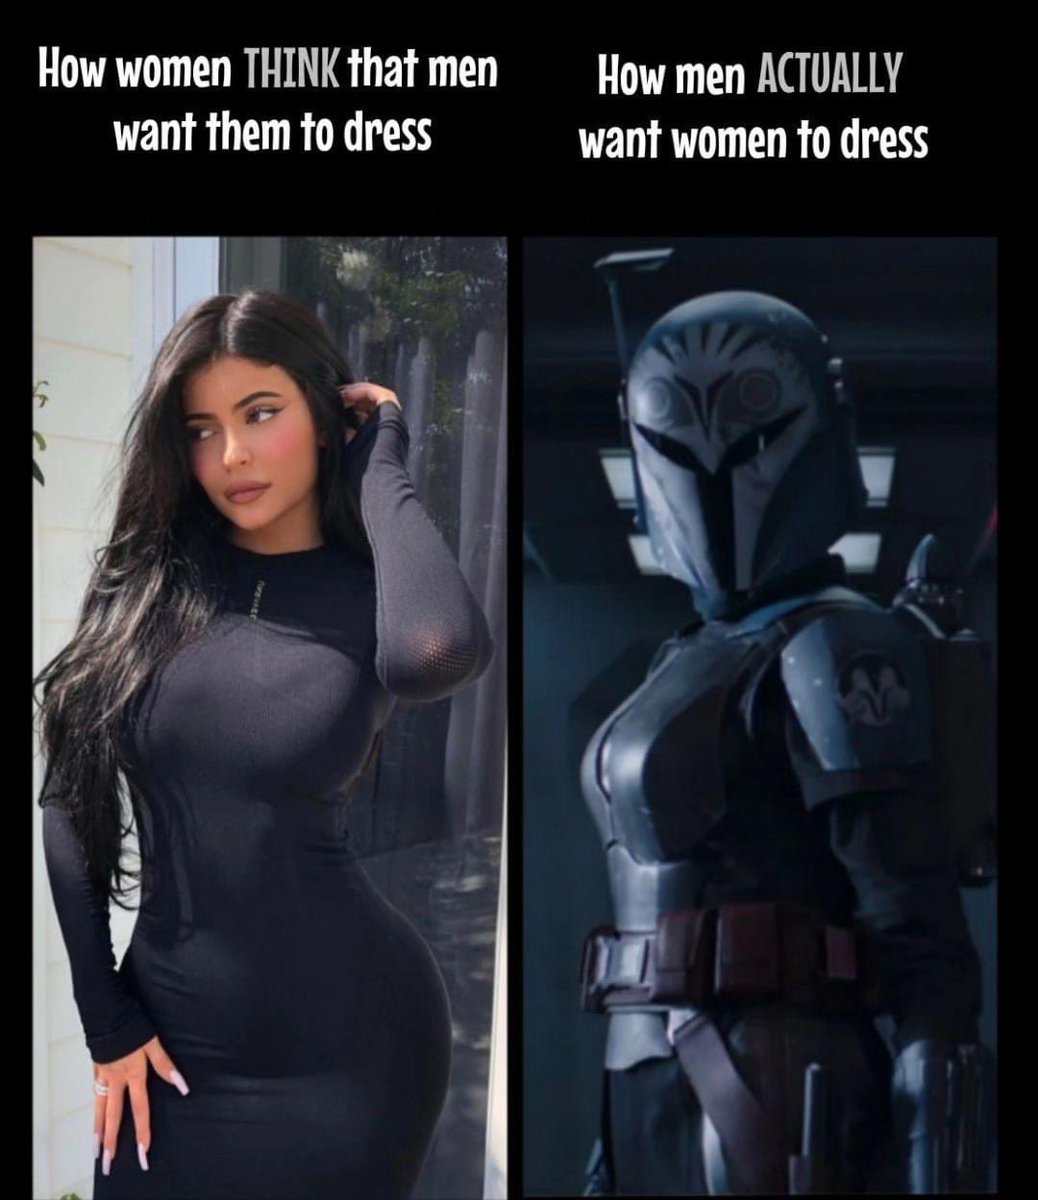 Follow us on all platforms to get some epic mandos, memes, music, and more! #starwarsmeme #starwarsmemes #starwarsfan #starwarsmemesdaily #mando #starwarsmemesfordays #swca #grogumemes #mandalorianmemes #themandalorianmemes #starwars #themandalorian #mandaloriancosplay